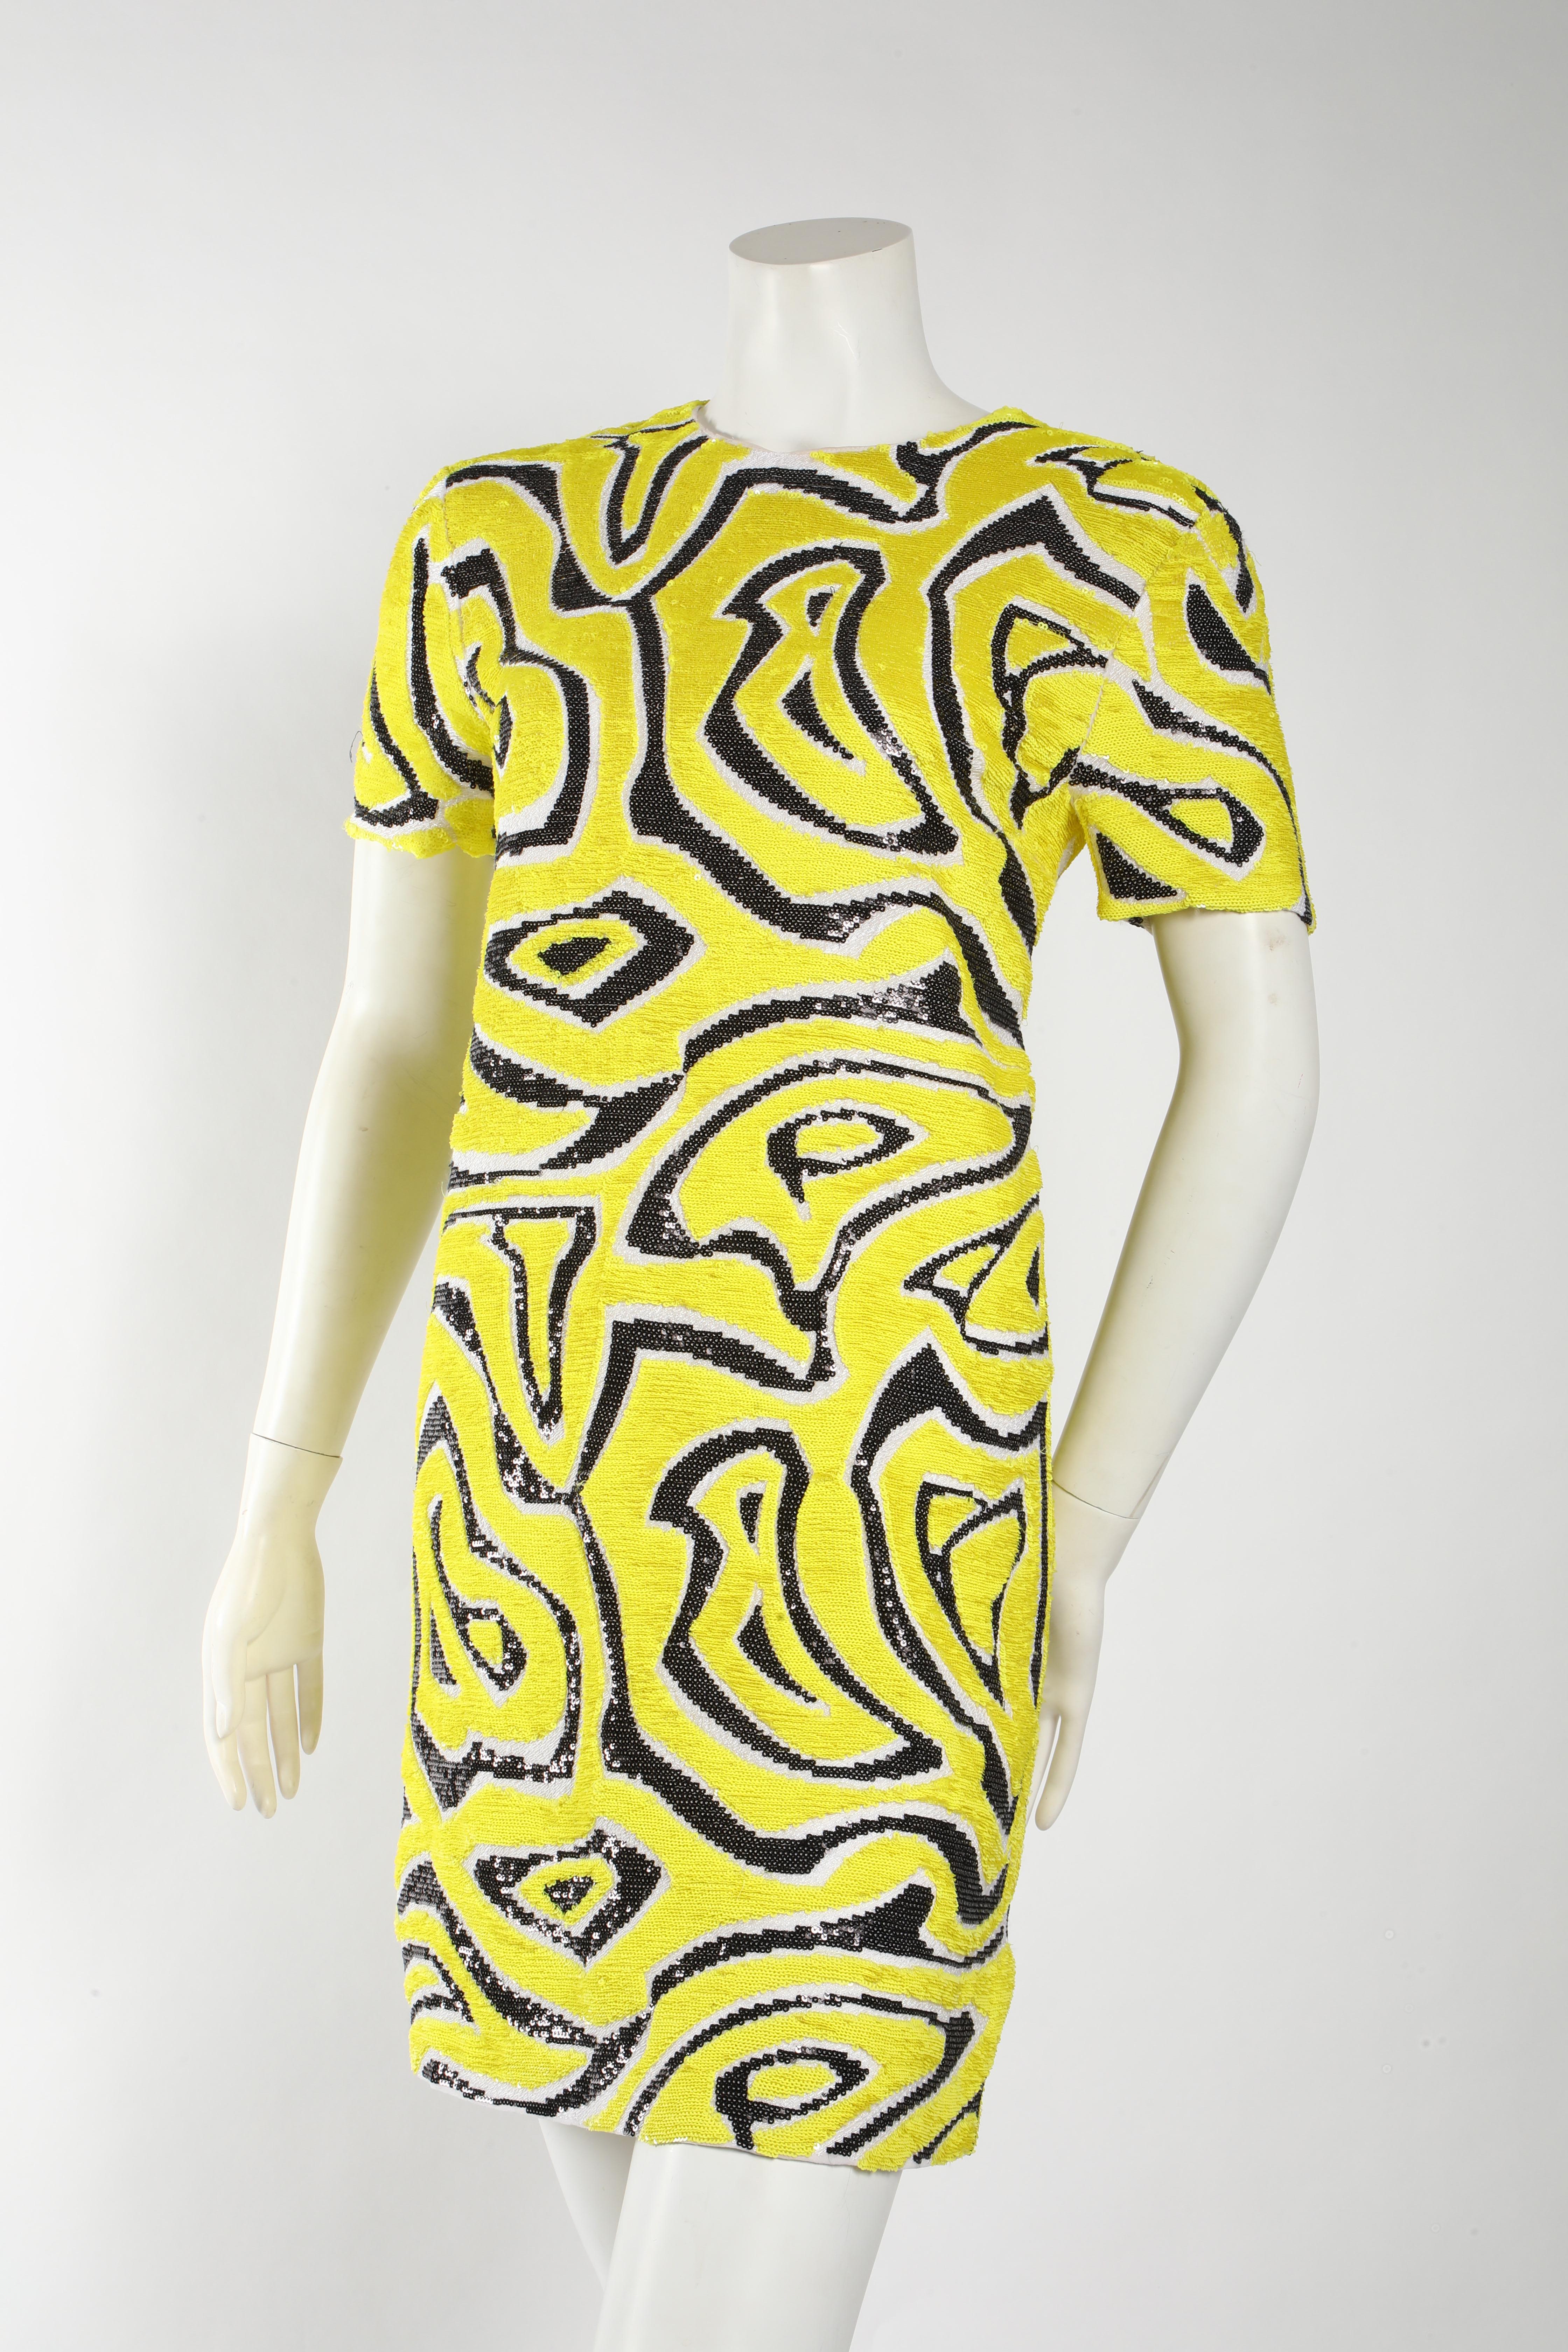 This eye catching Emilio Pucci sequin cocktail dress is the perfect statement piece! The yellow and black design is made out of sequins for a little sparkle. 

Retailing for $4170 it is in mint condition and has no signs of wear. 
The silhouette is